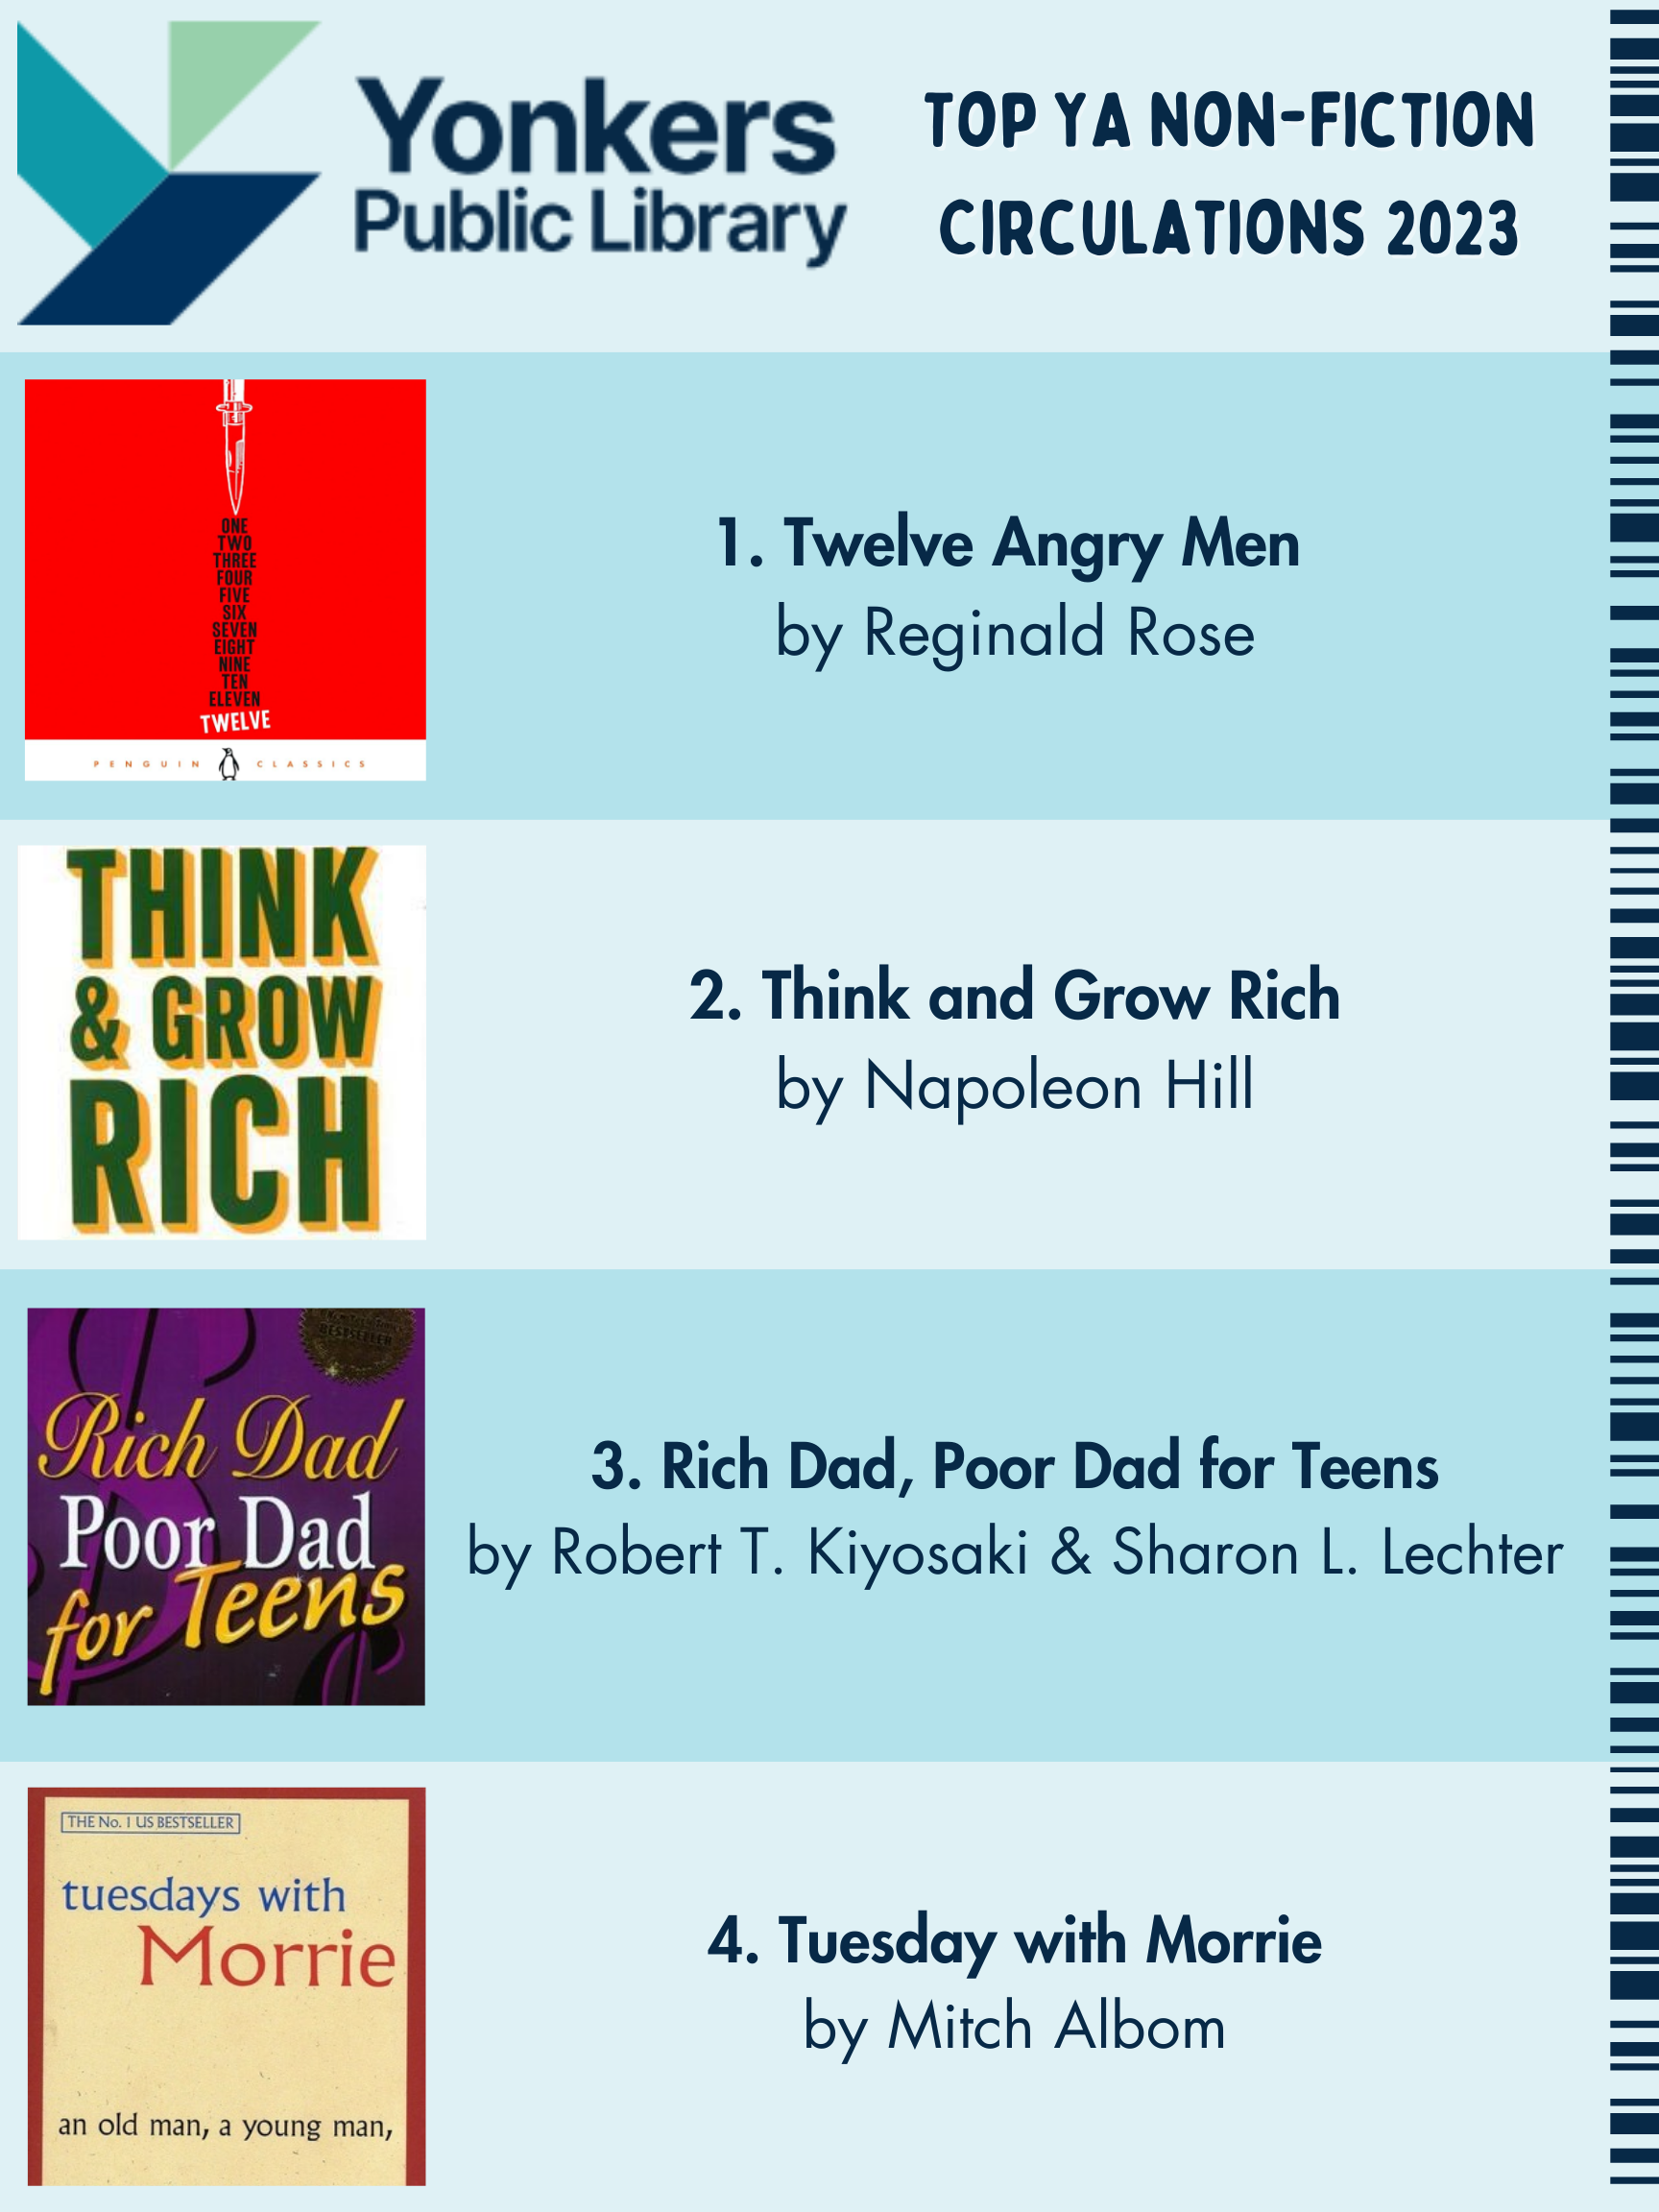 Top YA NonFiction Circulations 2023. Twelve Angry Men, Think and Grow Rich, Rich Dad Poor Dad for Teens and Tuesdays with Morrie.